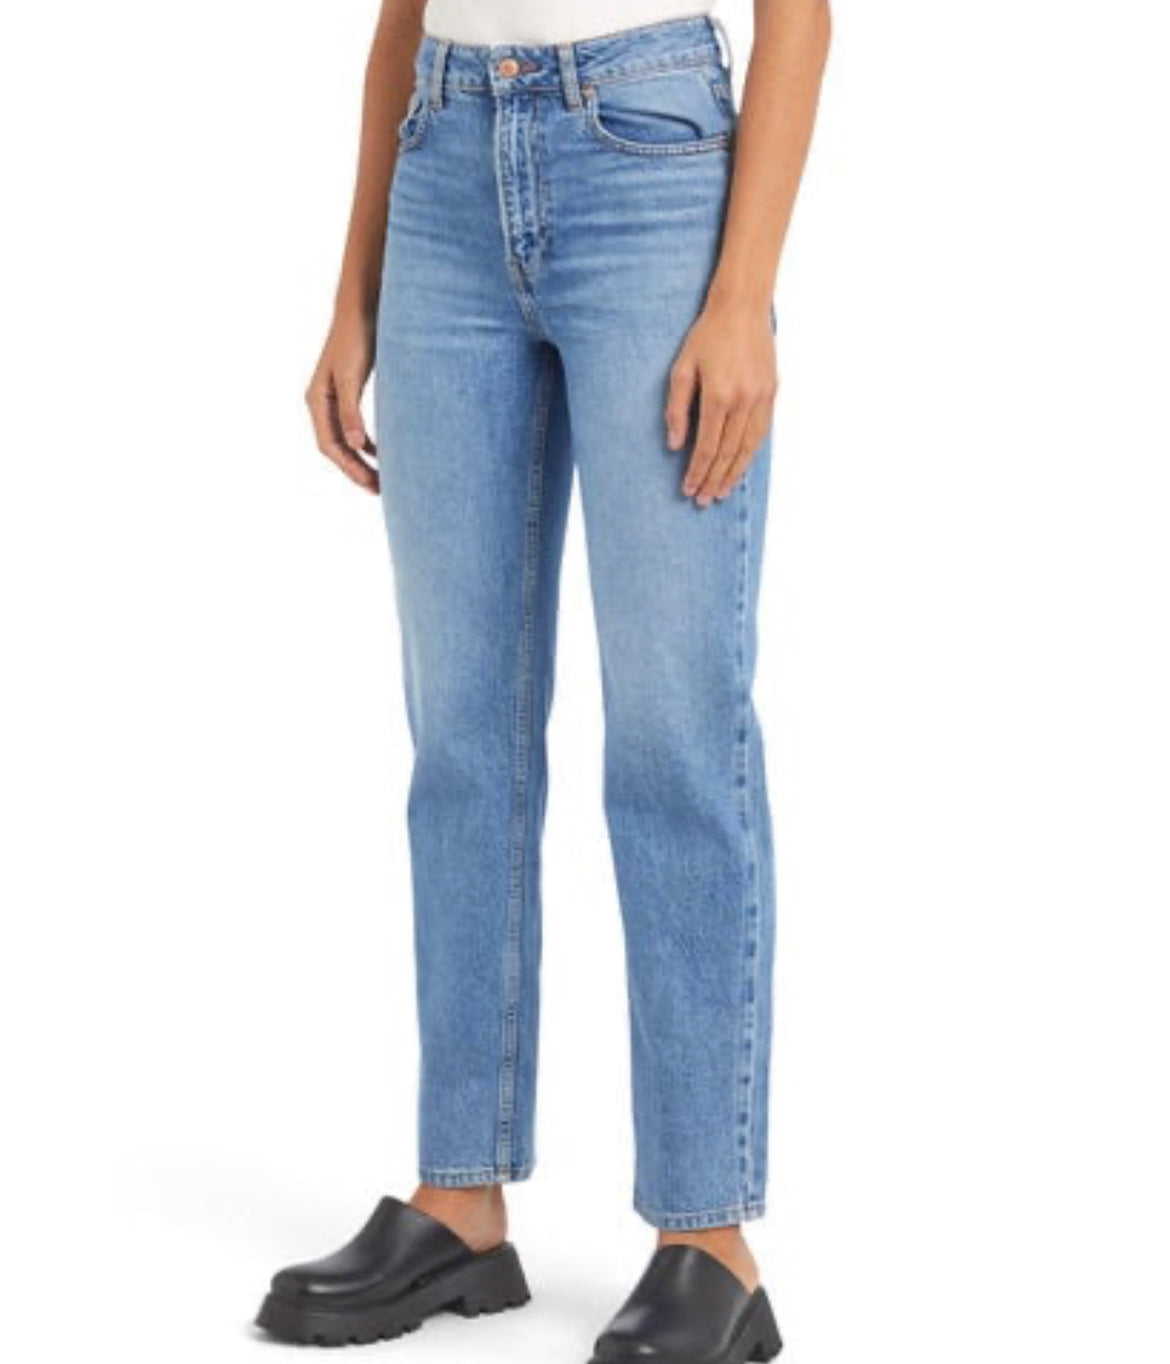 Buy We The Free Pacifica Jeans